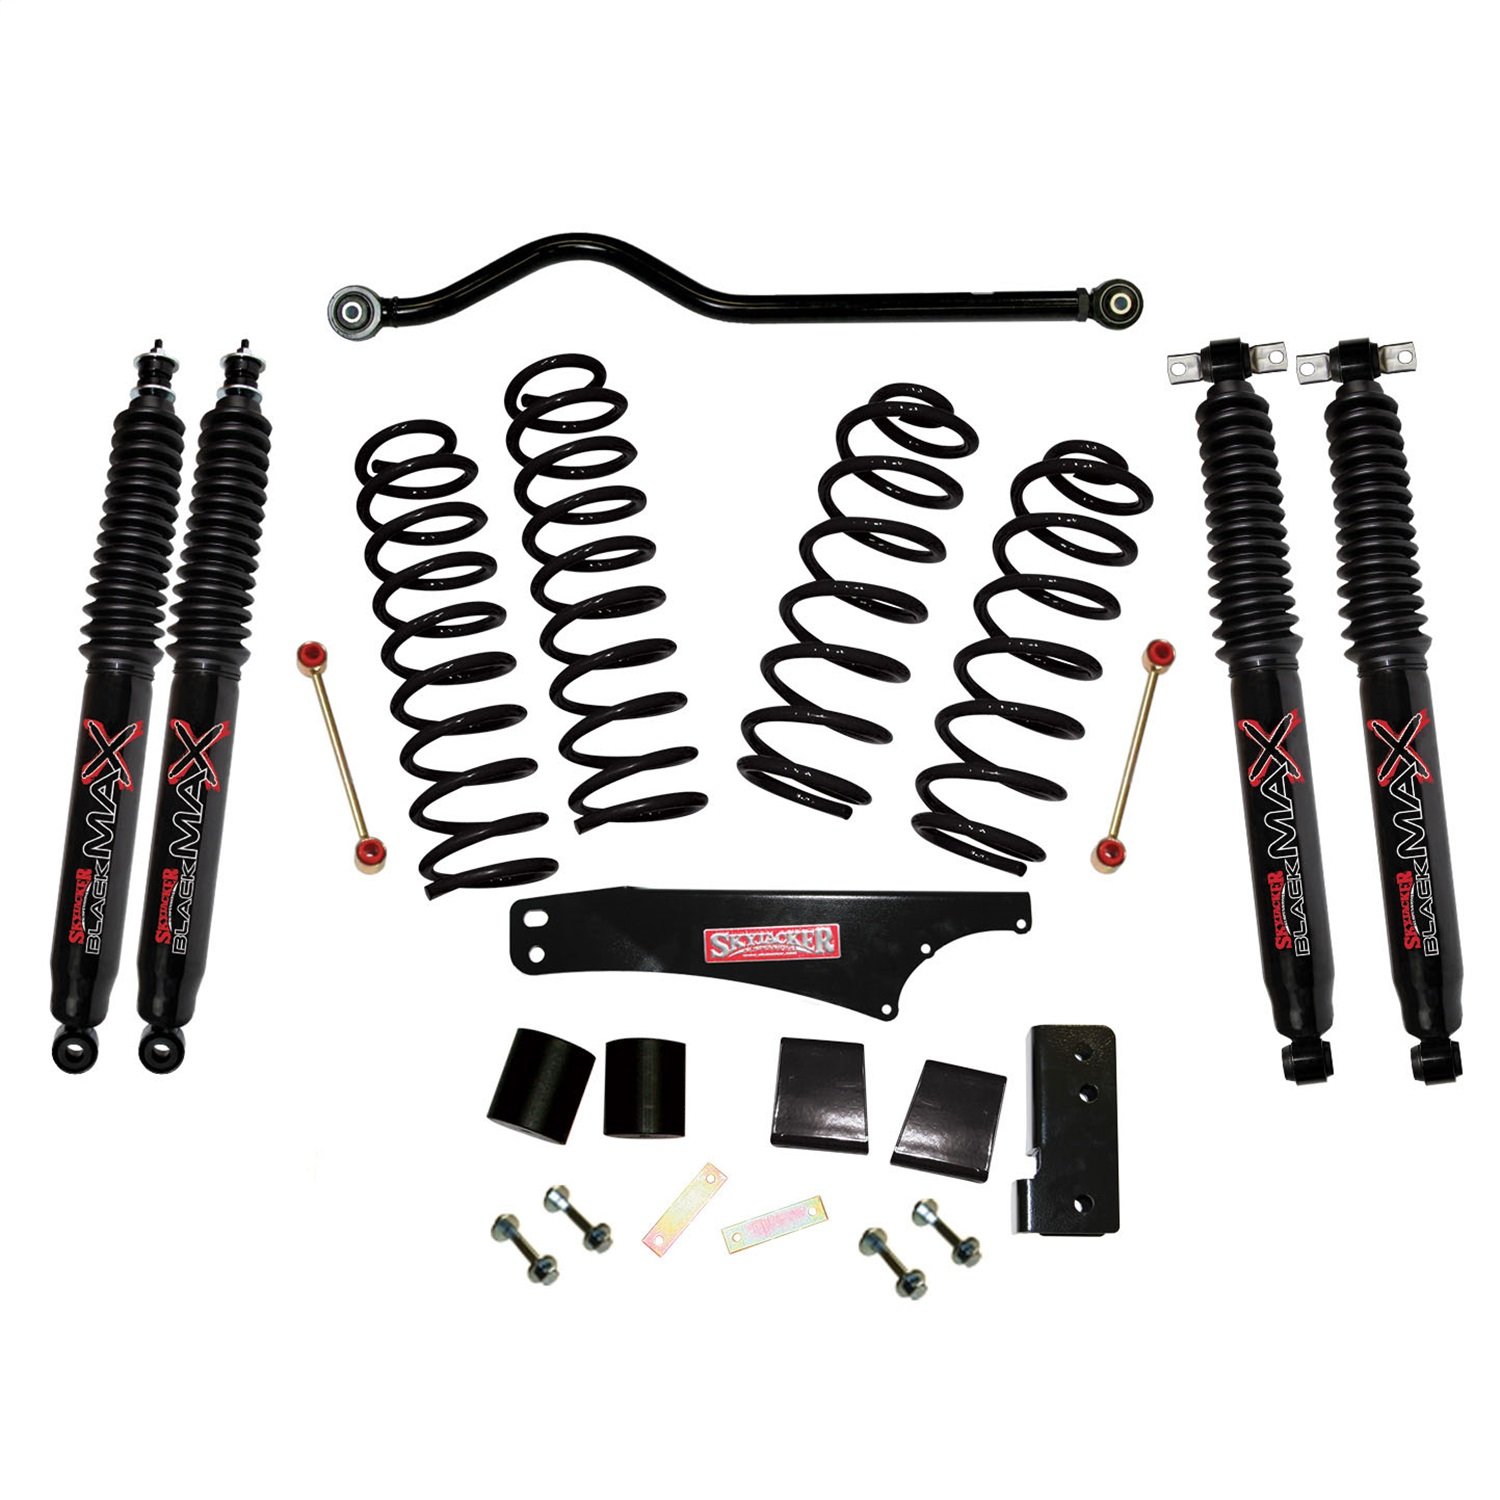 JK350BPBSR Front and Rear Suspension Lift Kit, Lift Amount: 3.5 in. Front/3.5 in. Rear